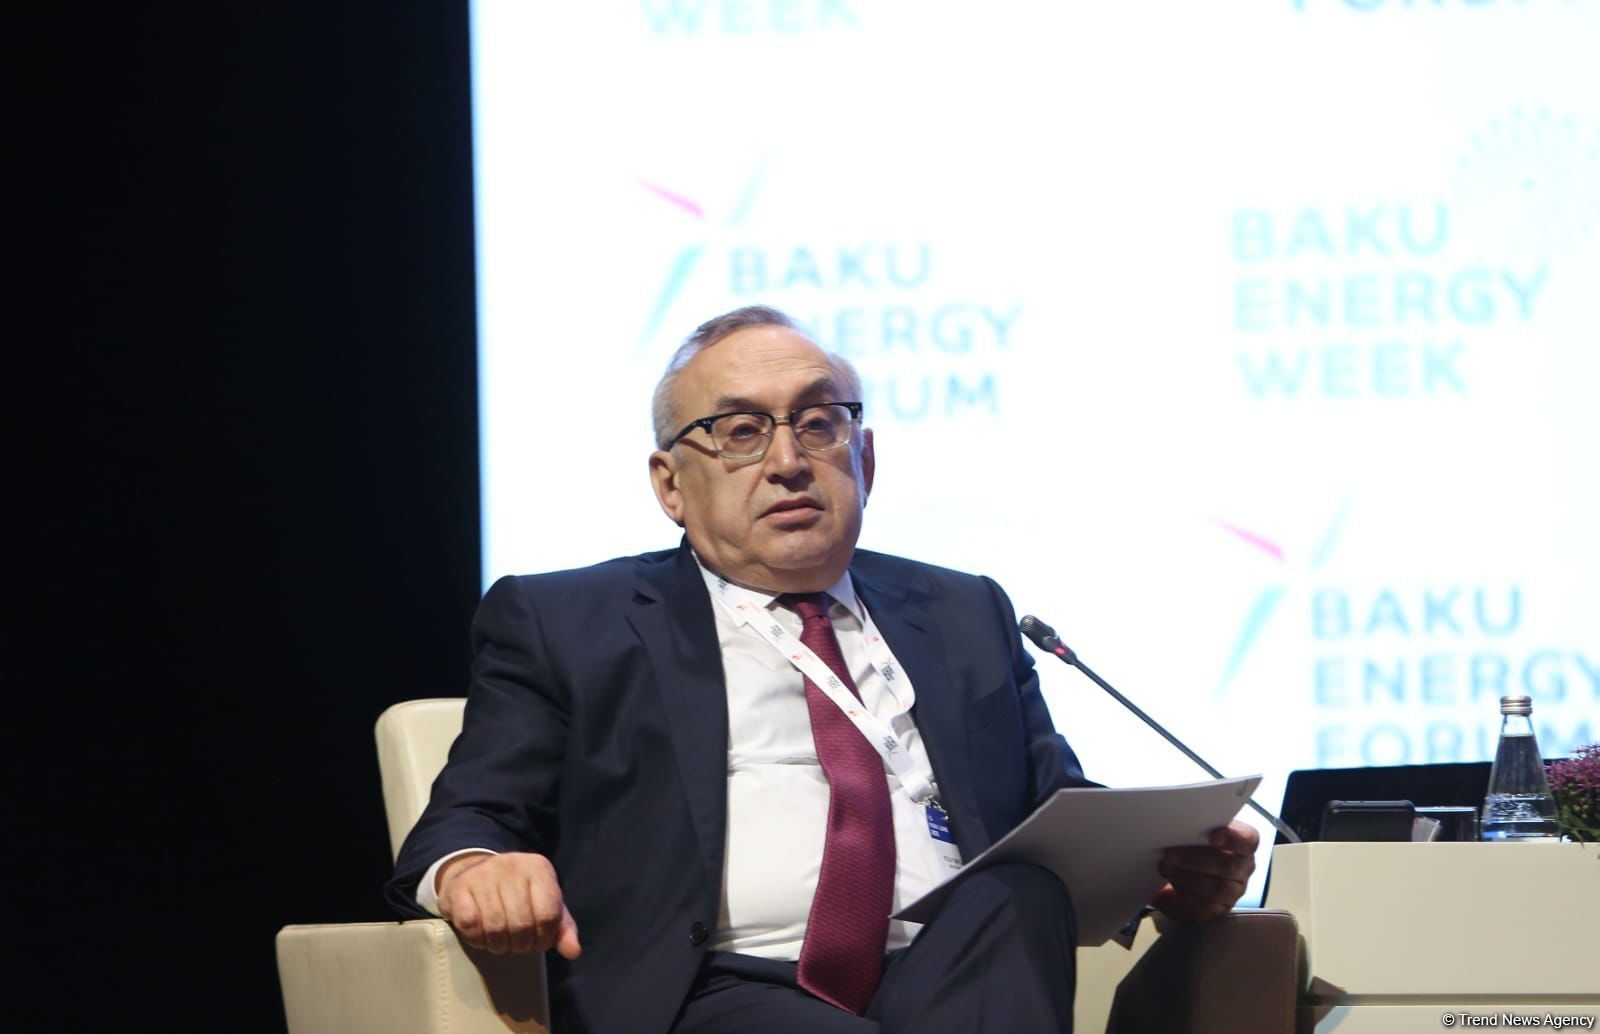 Azerbaijan provides stable pricing policy for energy market - SOCAR